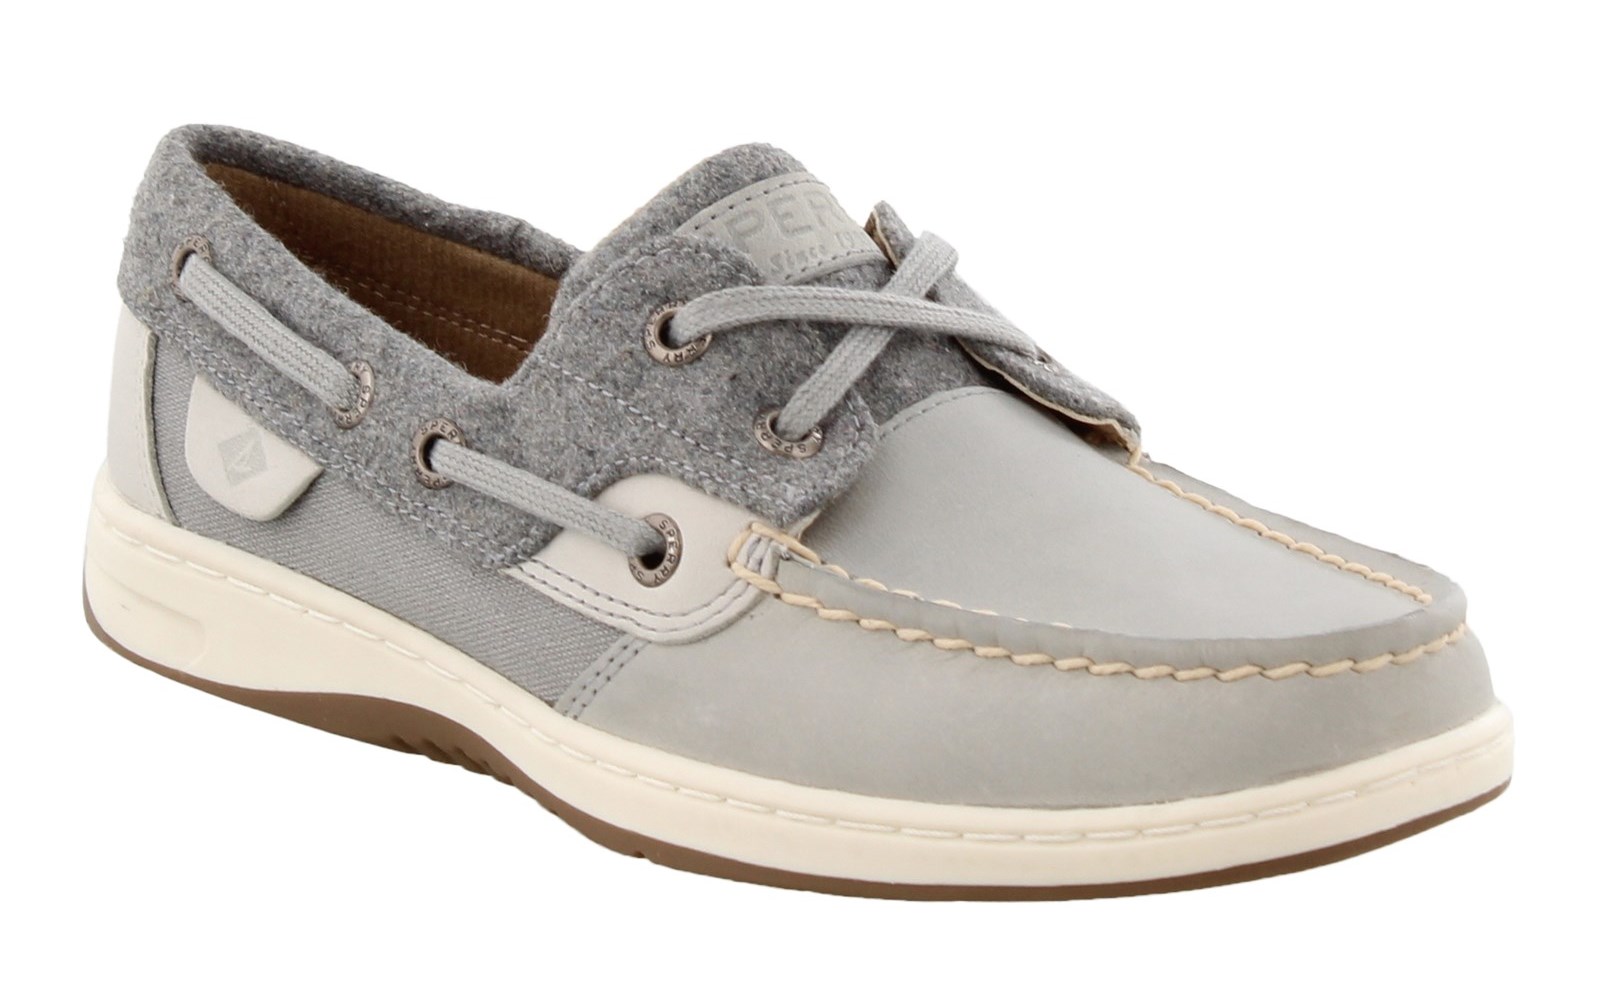 Sperry Womens Bluefish Boat Shoe -  Smoked Pearl - 5.5